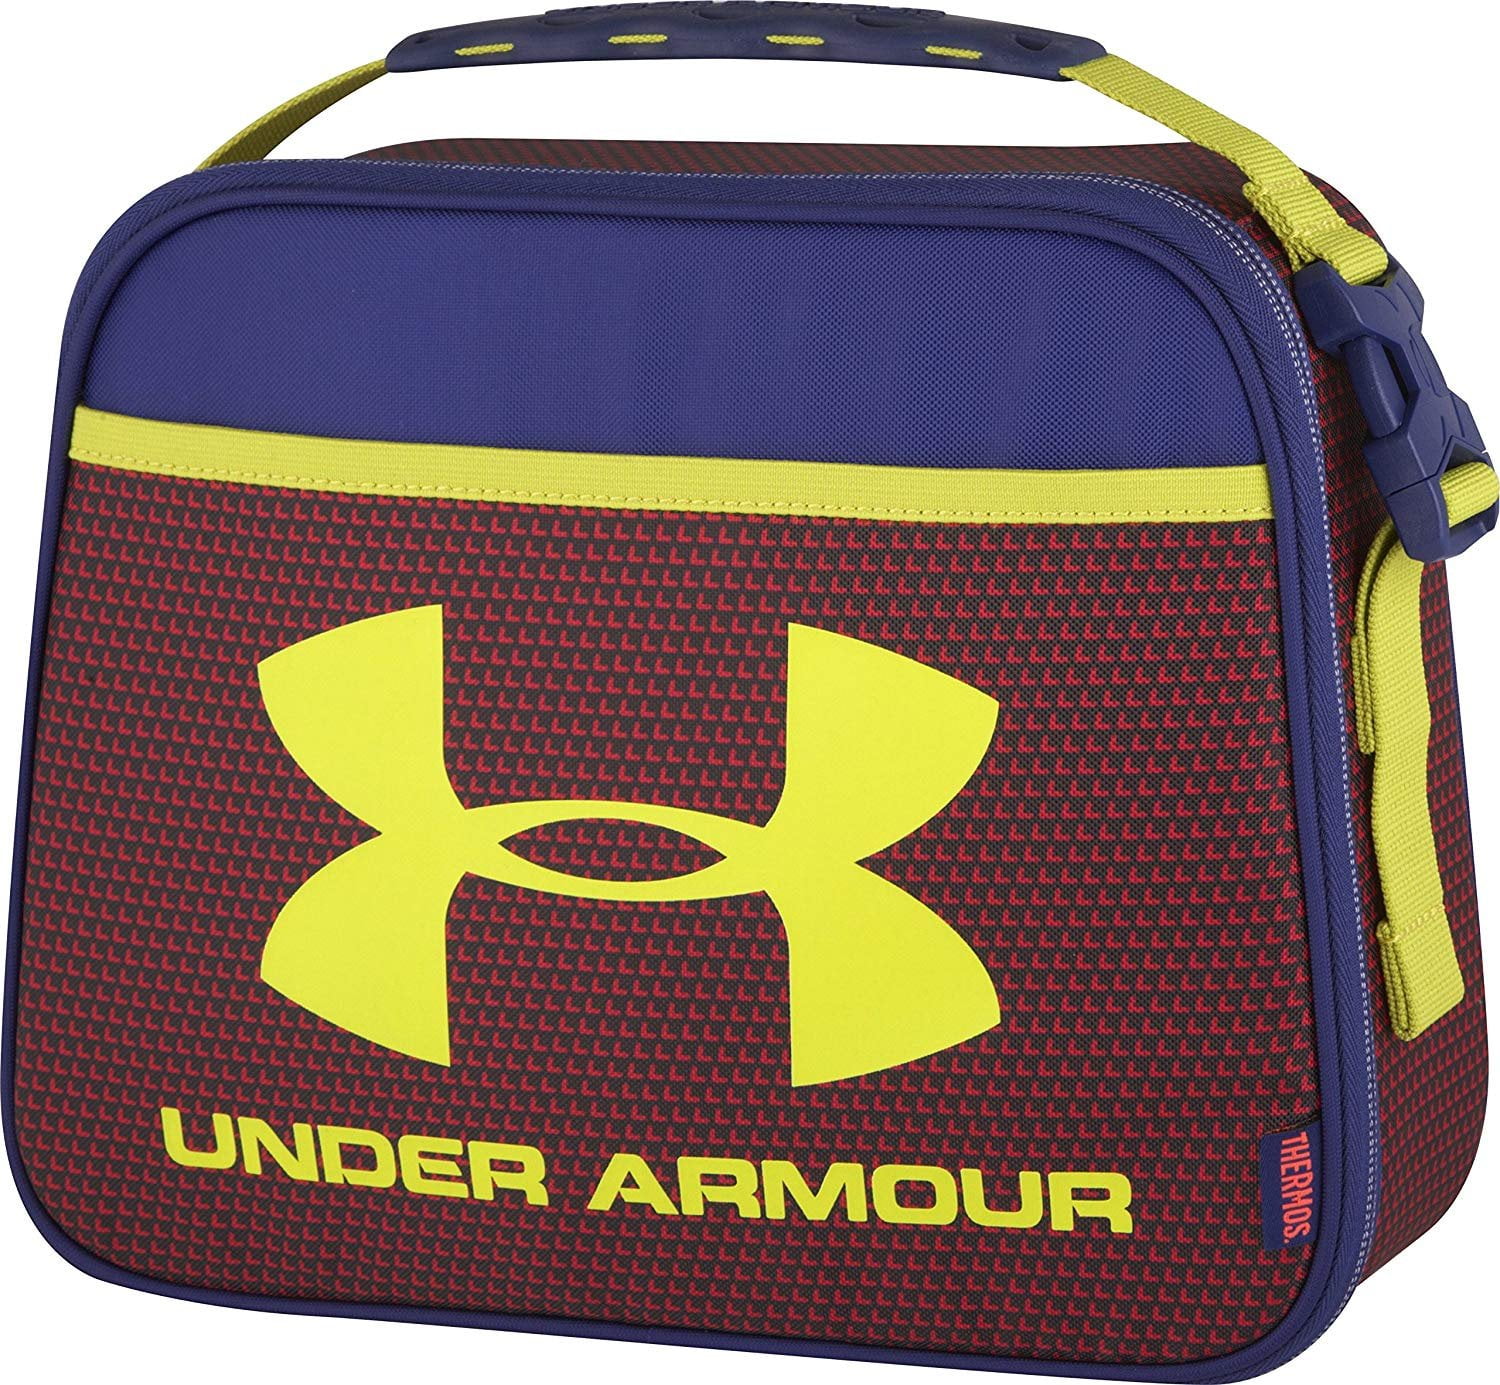 Under Armour, Accessories, Under Armour Lunch Box